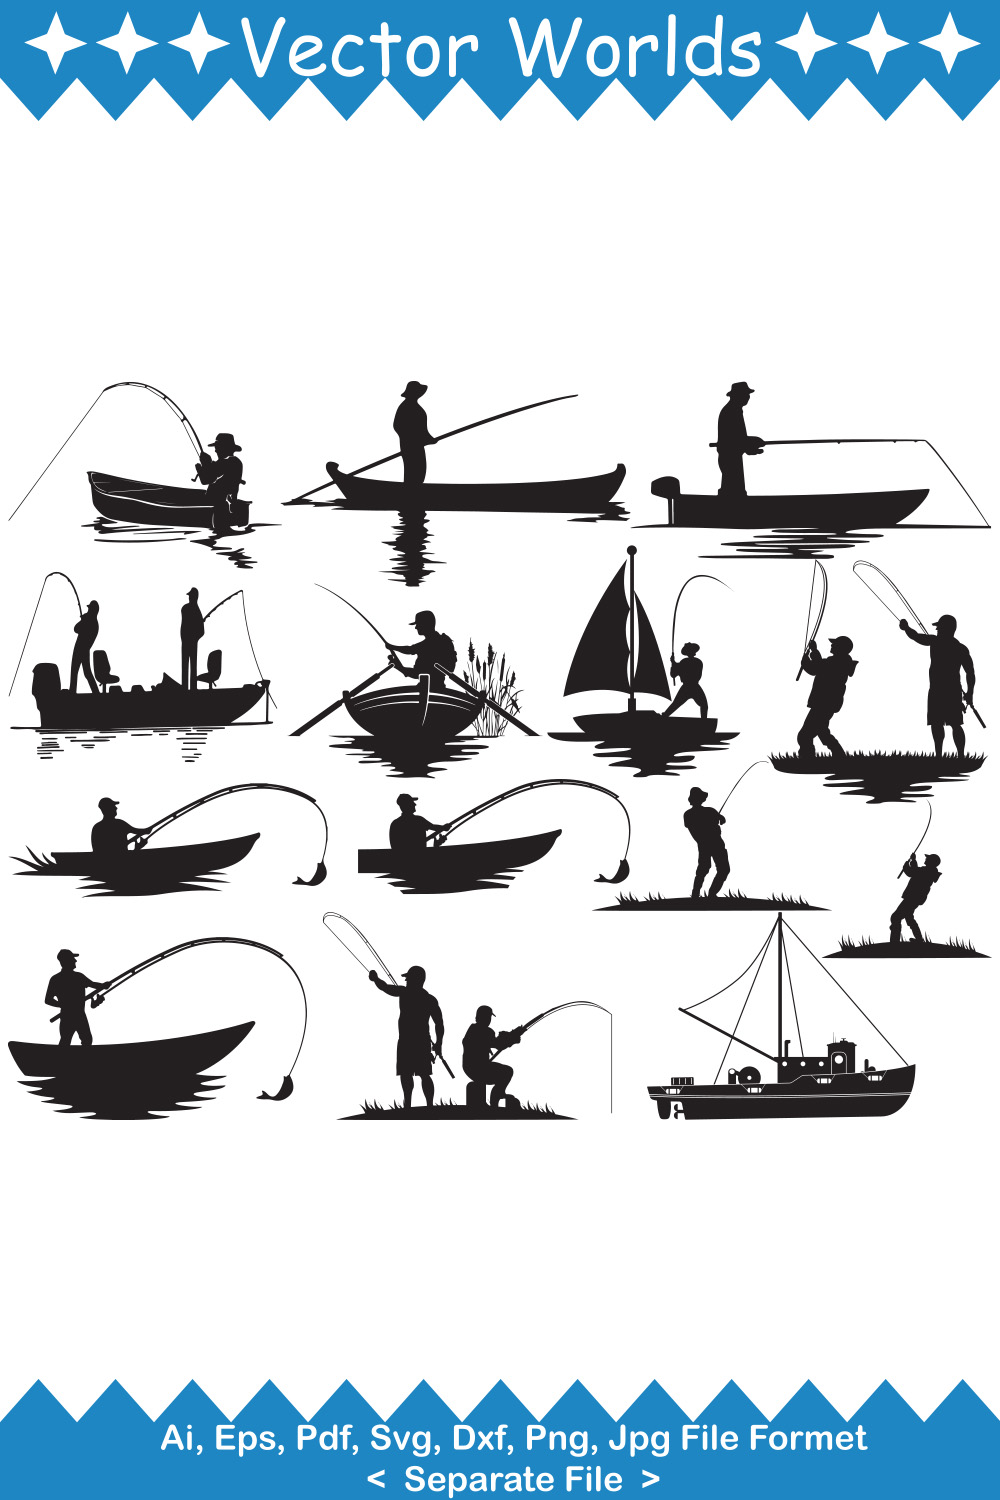 A selection of vector unique images of silhouettes of fishermen on boats.